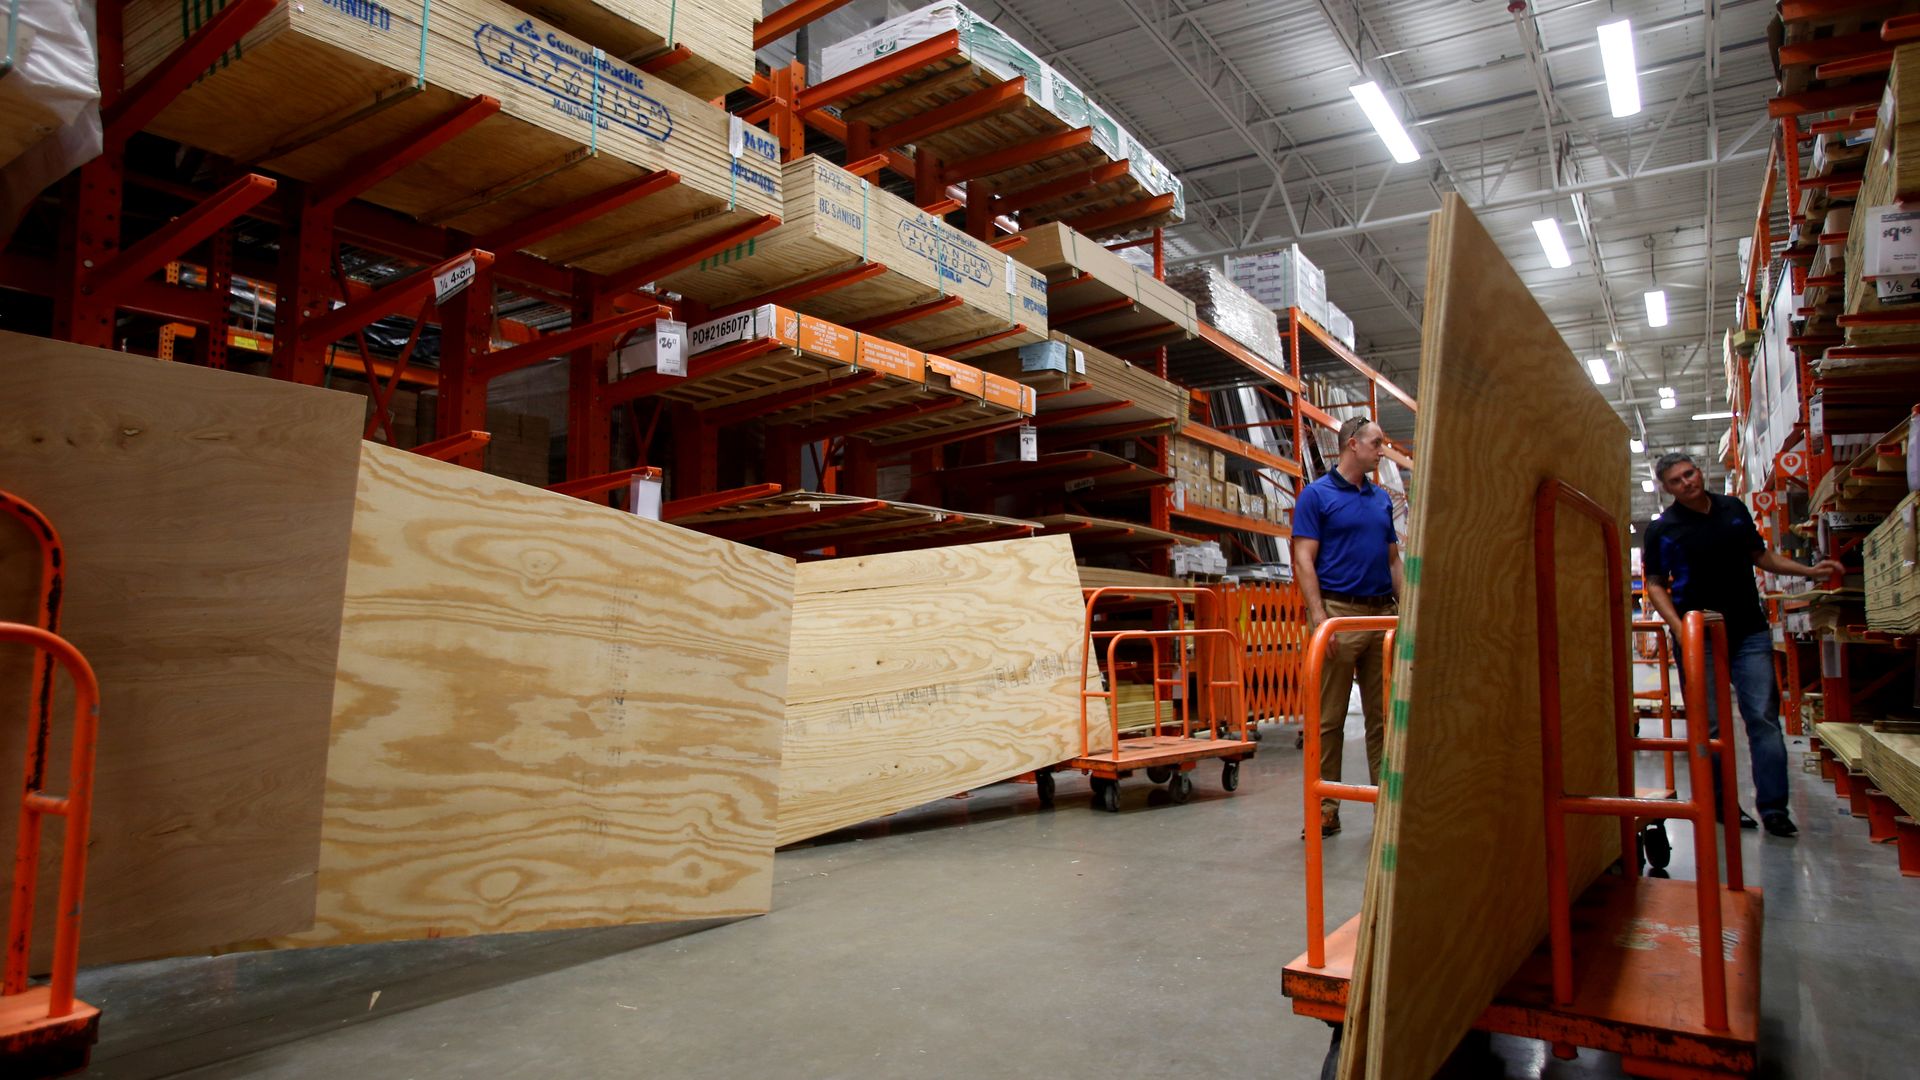 Home depot shelves with stacks of plywood